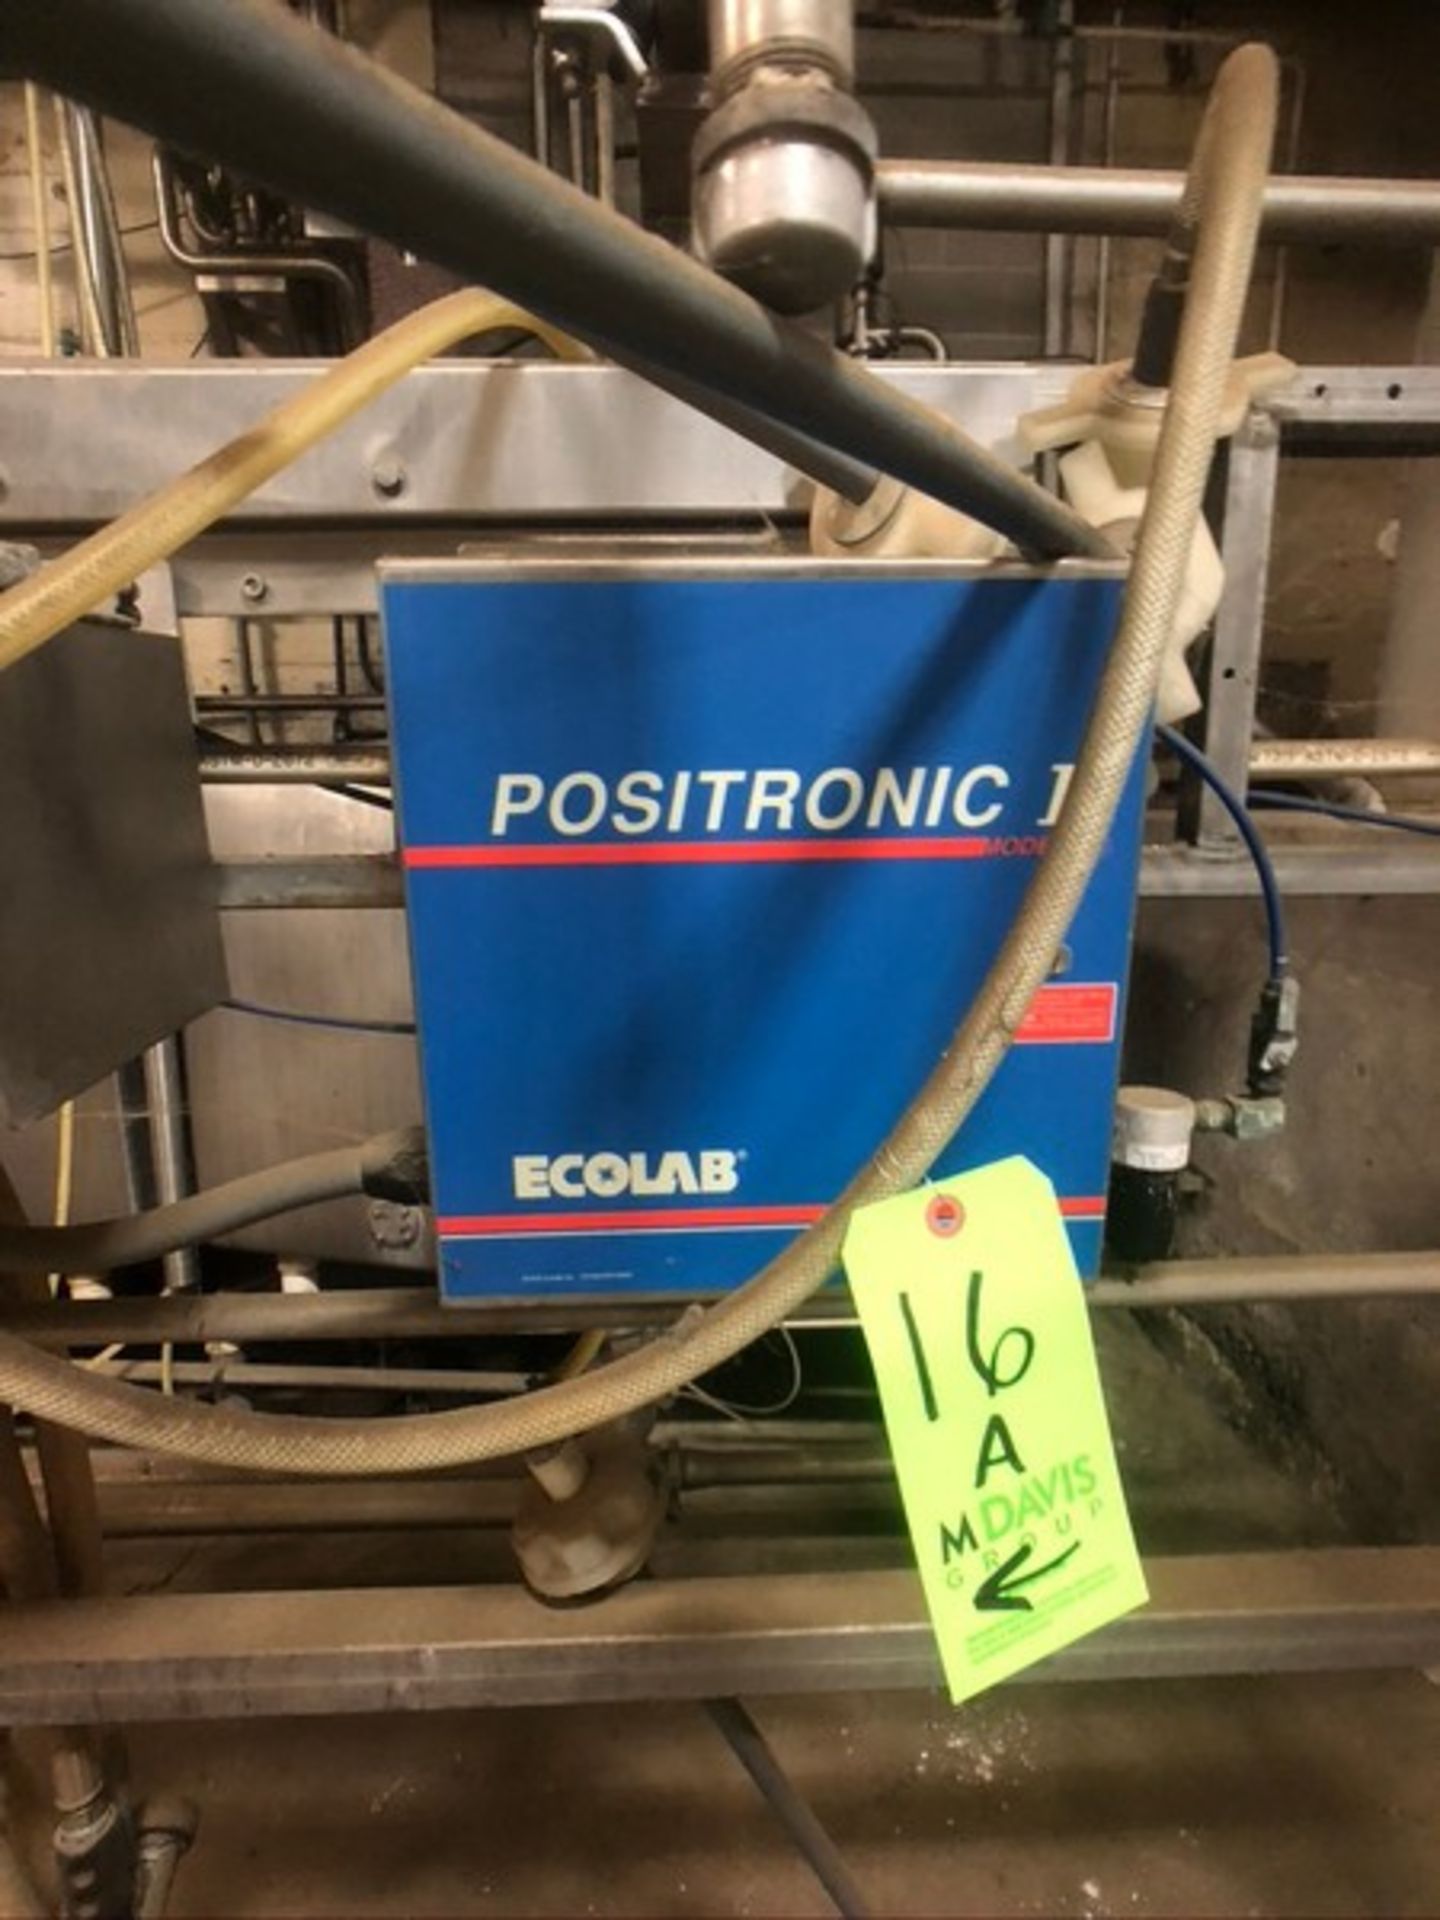 SANITATION AND CHEMICAL DOSING SYSTEM MOUNTED ON S/S RACK WITH ECOLAB POSITRONIC IV AND PROMINENT - Image 7 of 9